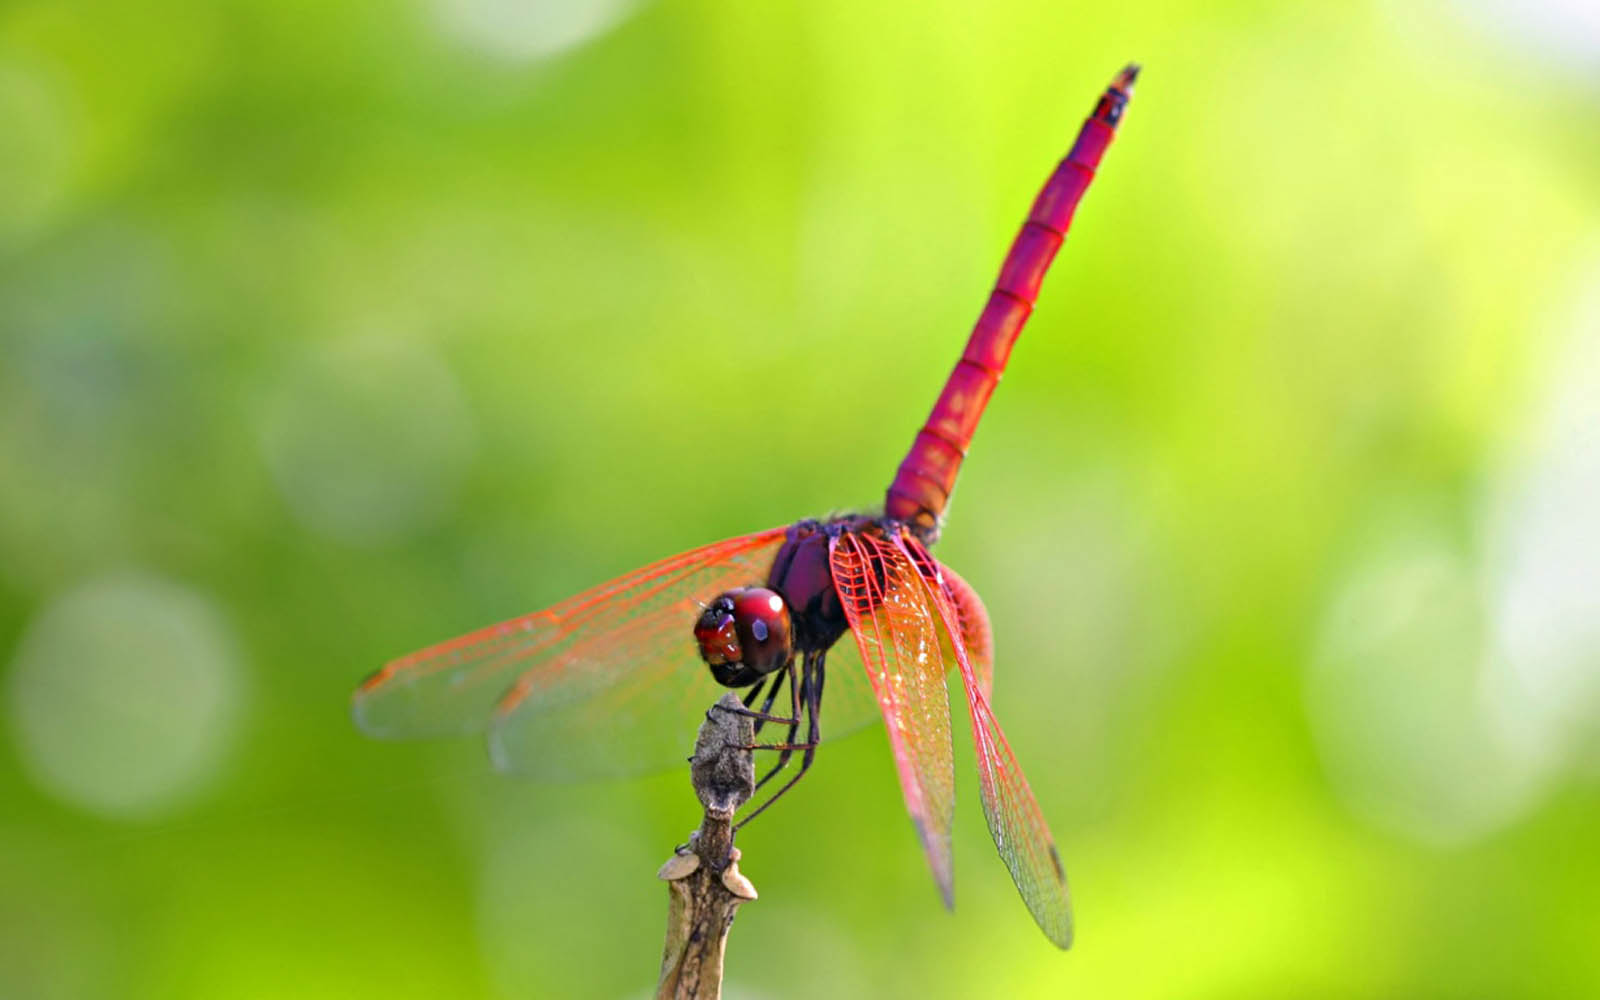 dragonfly wallpaper,dragonfly,insect,dragonflies and damseflies,nature,macro photography